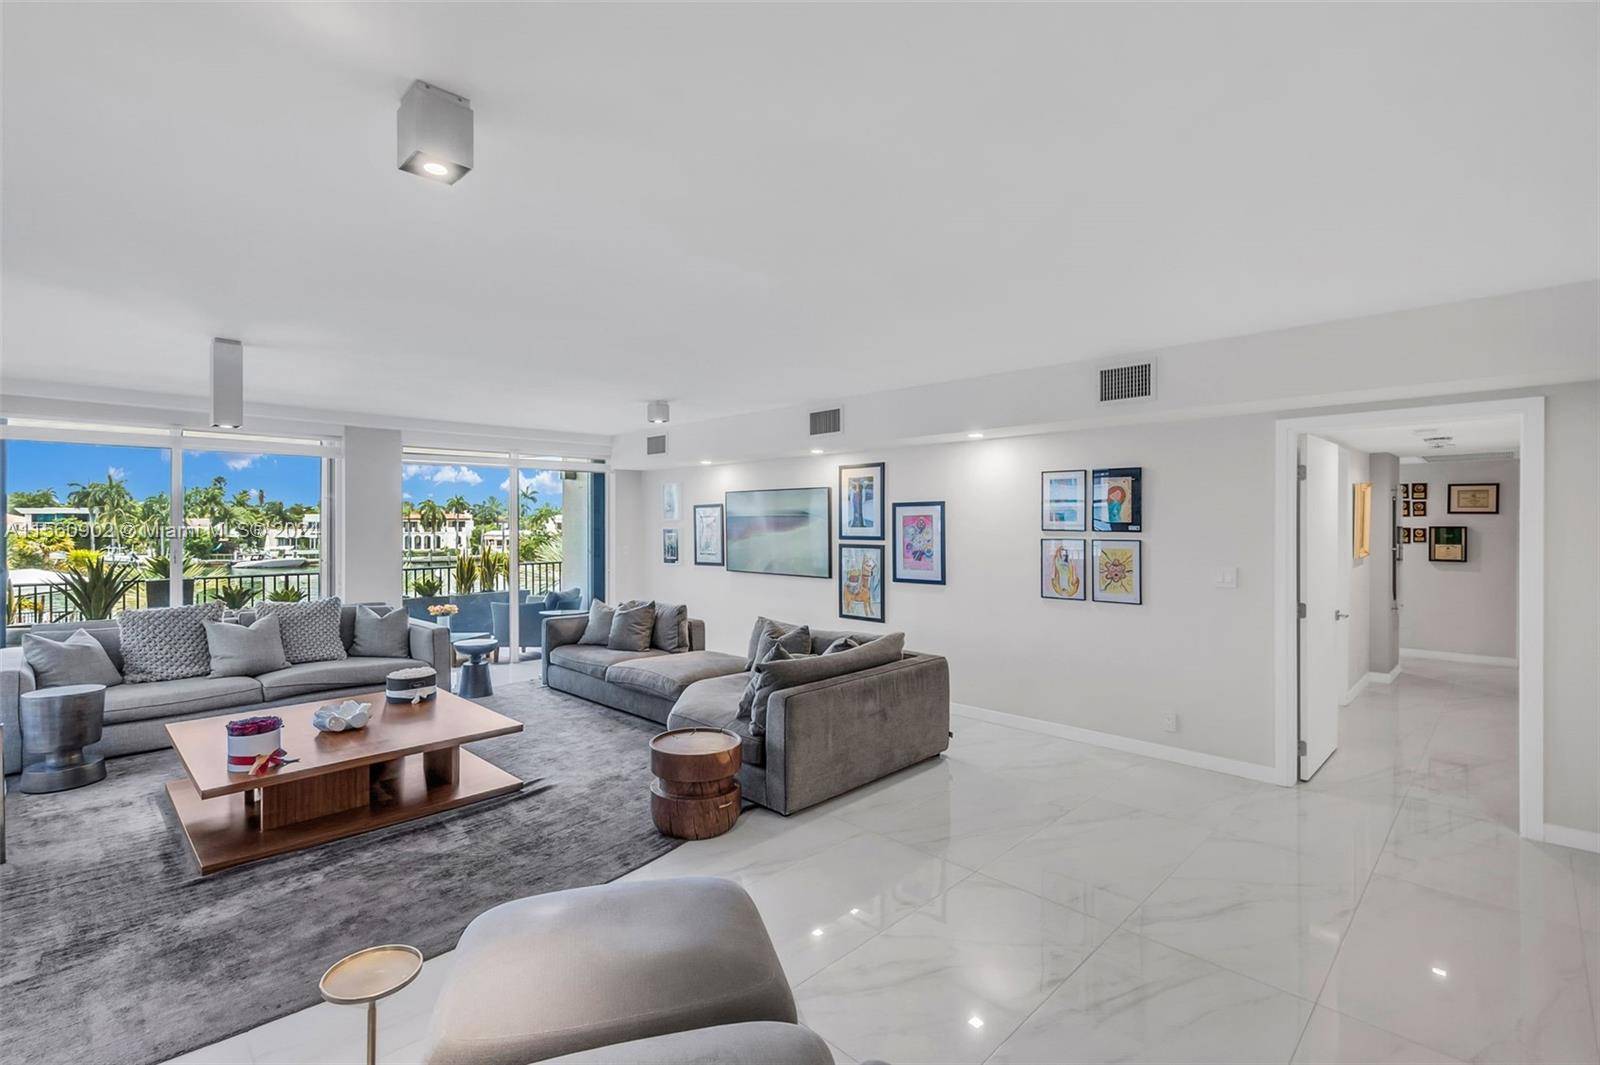 Enjoy this dream oasis in the heart of Miami Beach !